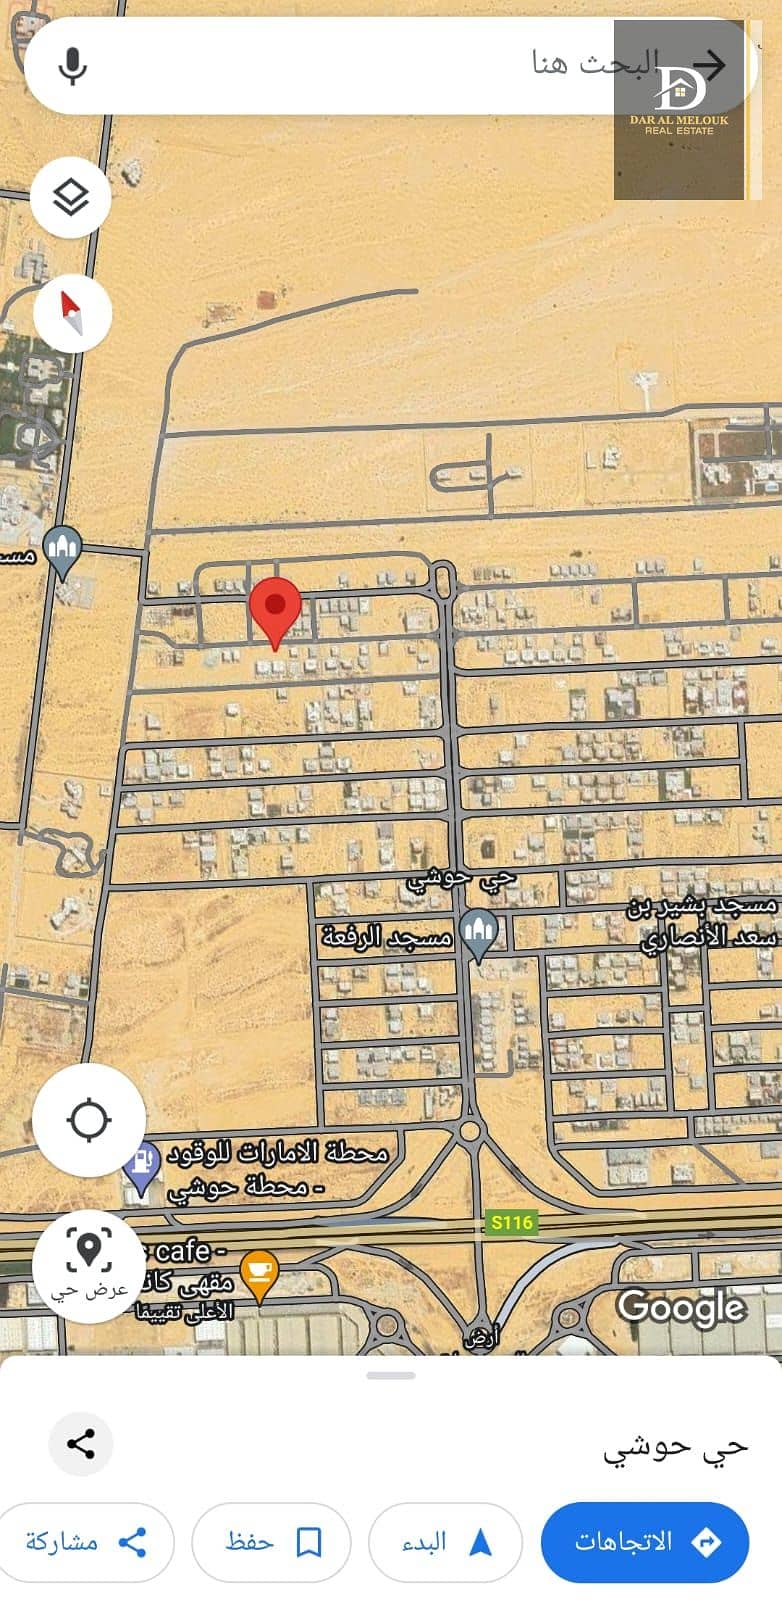 For sale in Sharjah, Al-Hoshi area, a piece of land with an area of ​​5,100 square feet, towards Al-Nouf, a very special location.